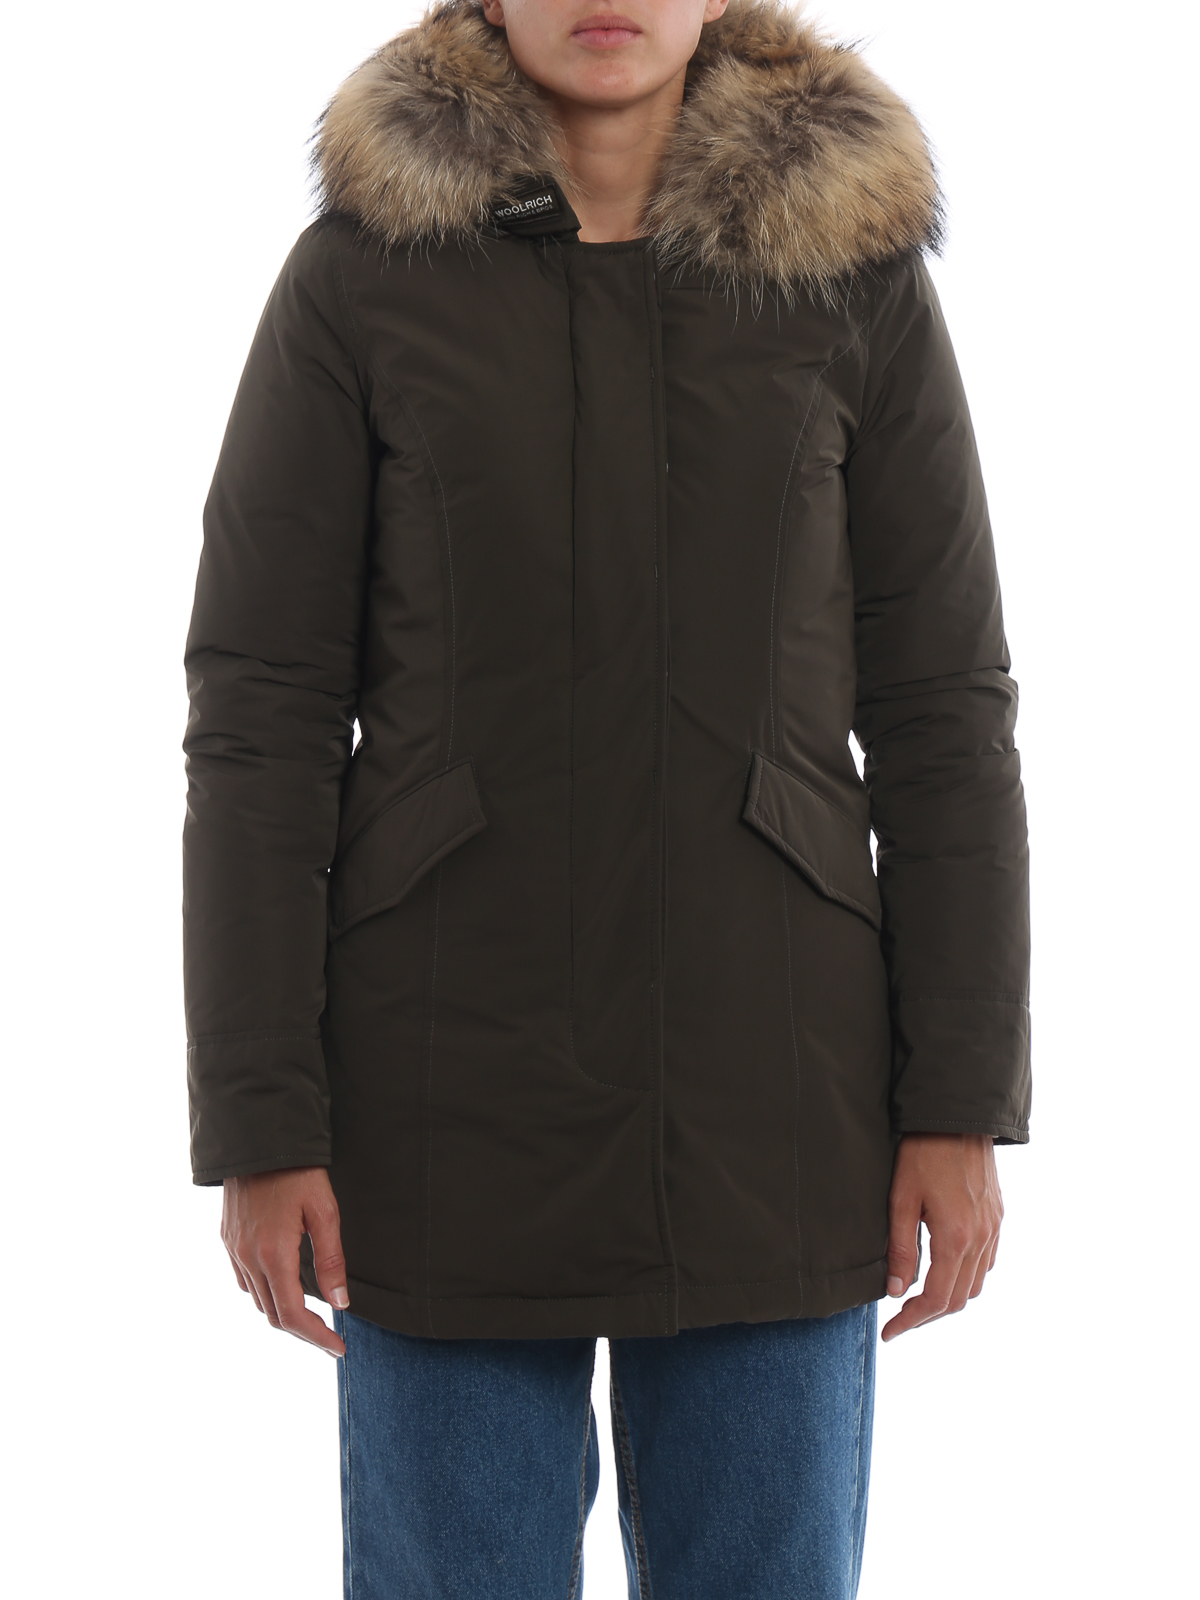 Padded coats Woolrich - Luxury Arctic army green padded coat ...